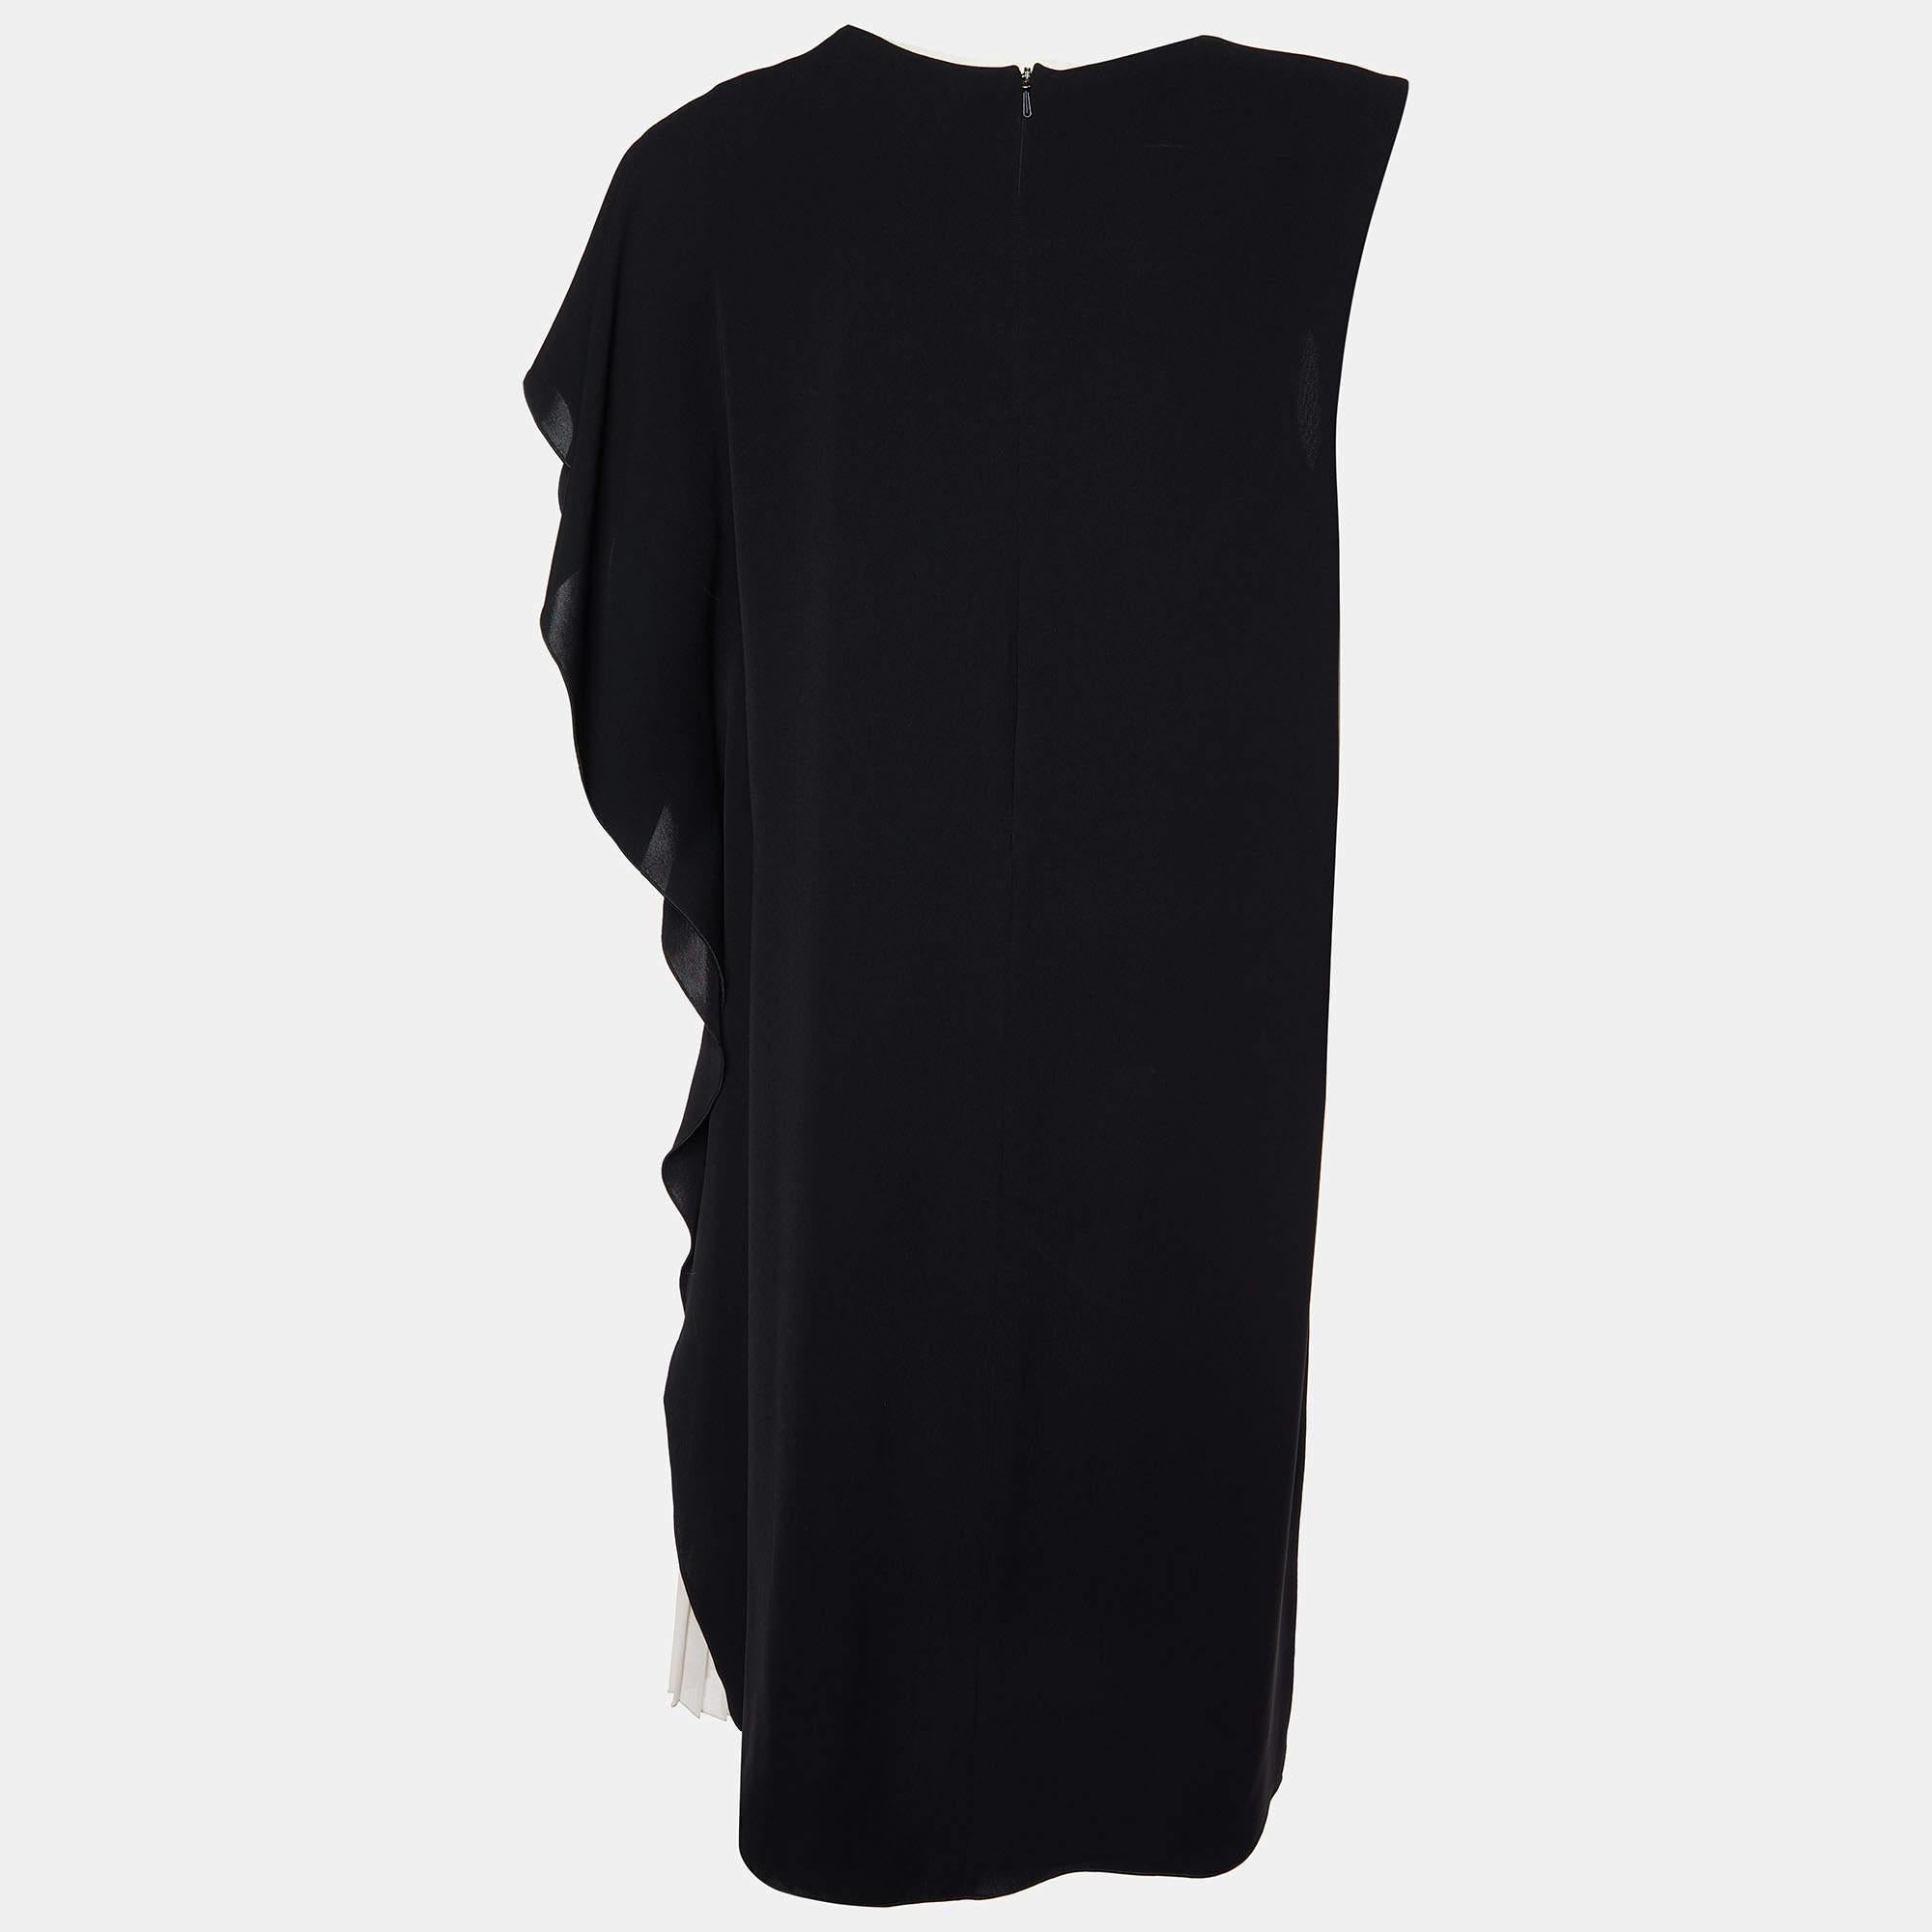 Experience the joy of expert tailoring with this designer dress for women. Meticulously made, it offers a flawless fit and luxe details, ensuring unmatched comfort. This beautiful creation will elevate your style effortlessly.

Includes: Price Tag